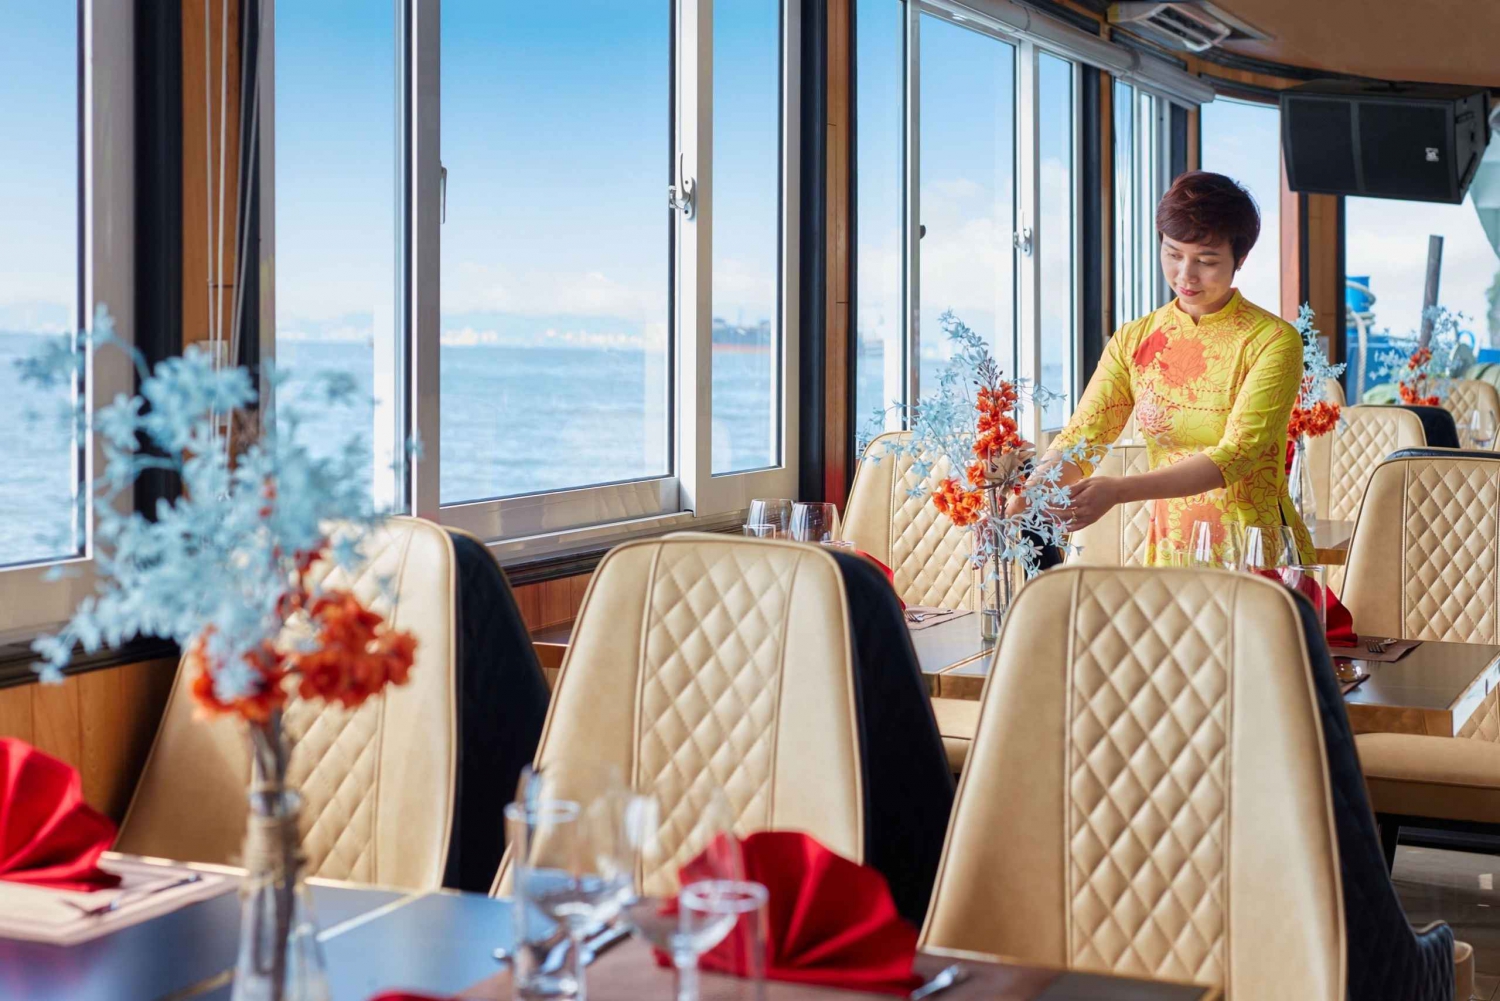 Ha Long 1 Day: 5 Star Cruise - Buffet Lunch - Free Red Wine